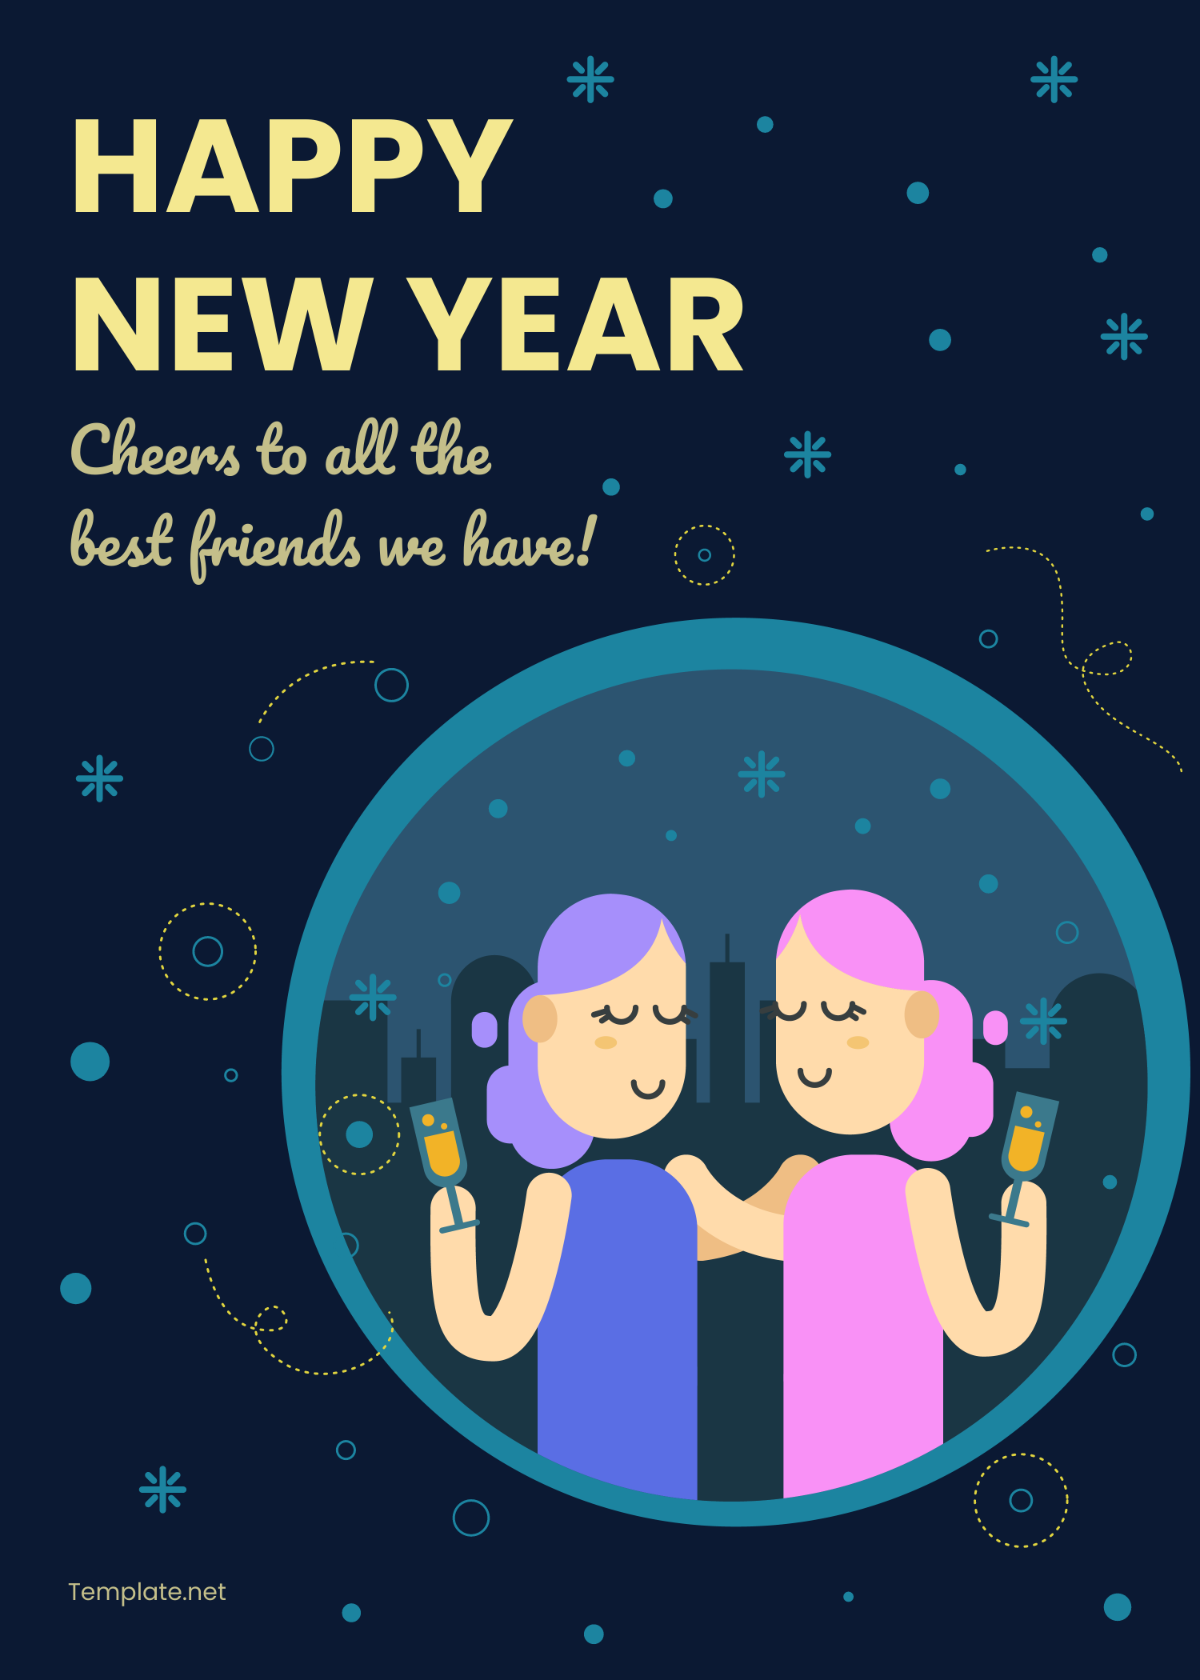 New Year Wishes for Best Friends Template